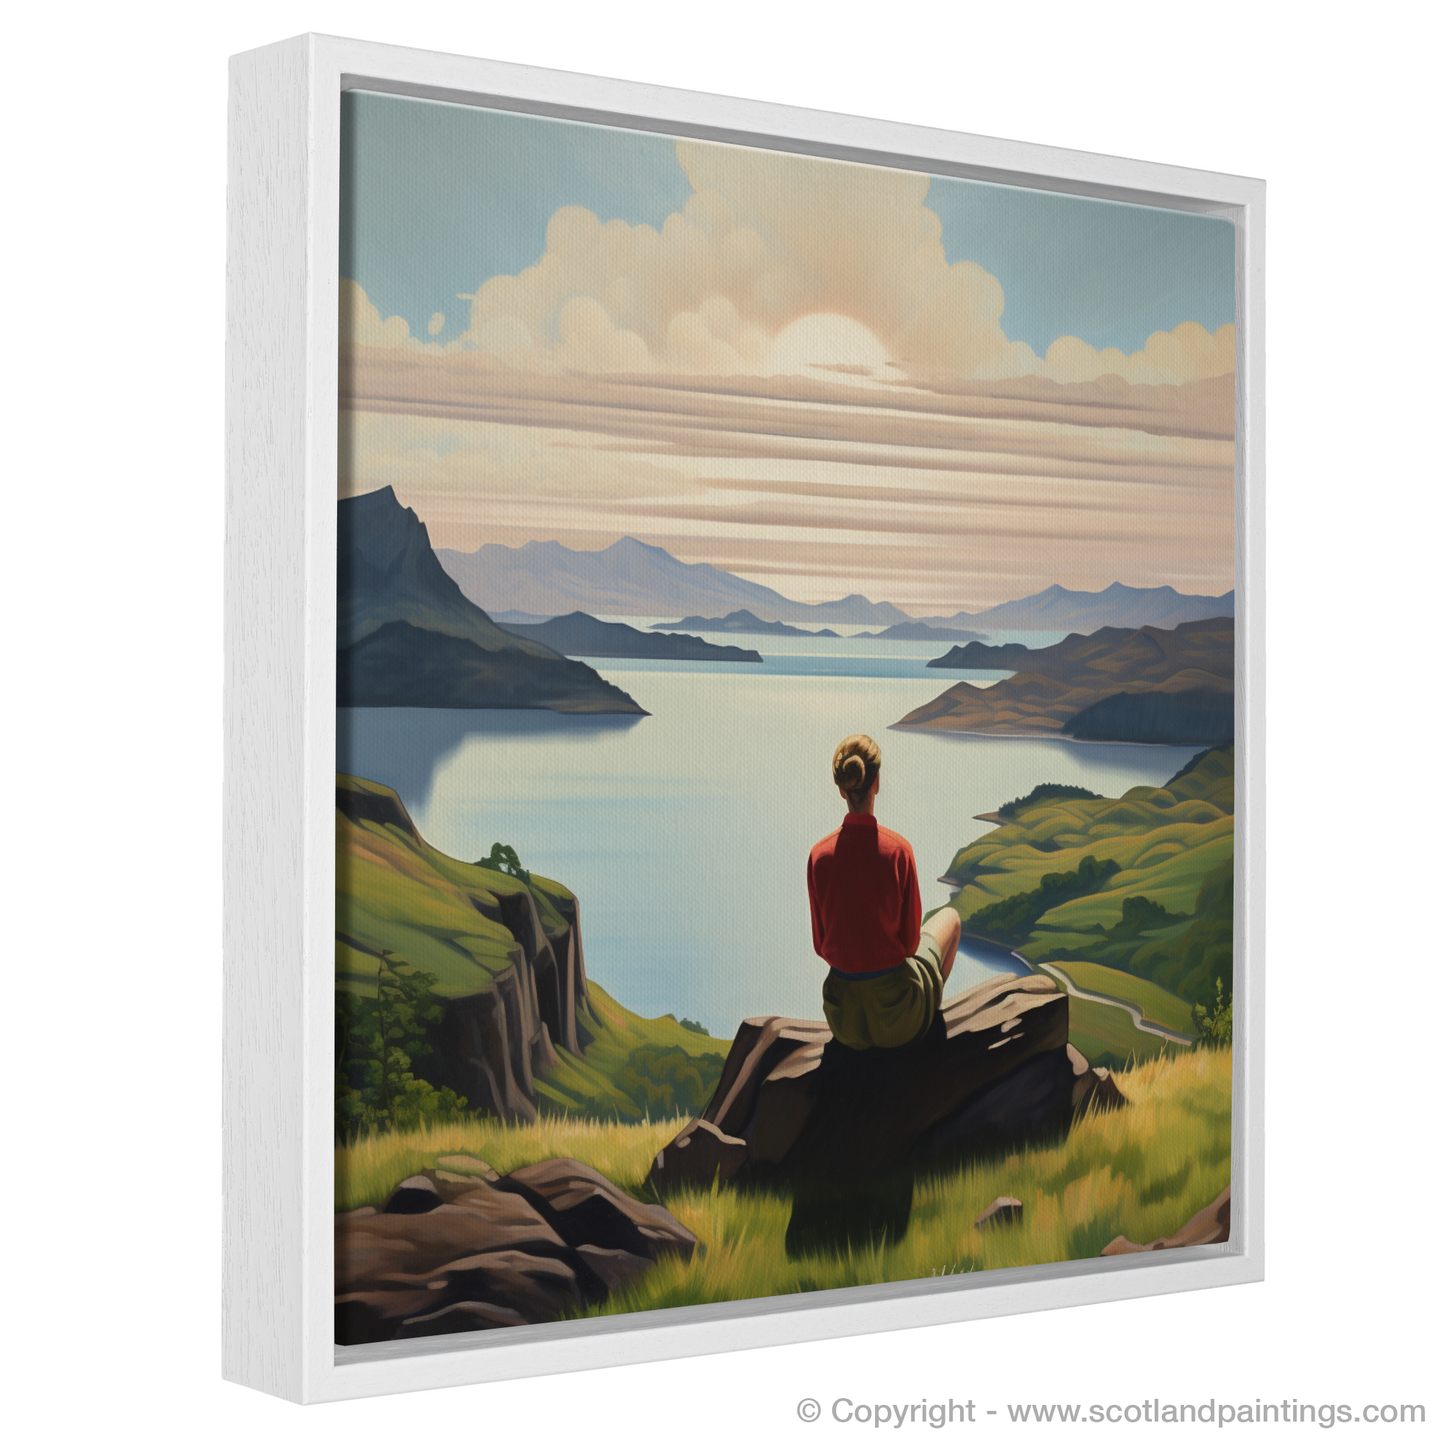 Painting and Art Print of Two hikers looking out on Loch Lomond entitled "Hikers' Reprieve at Loch Lomond".